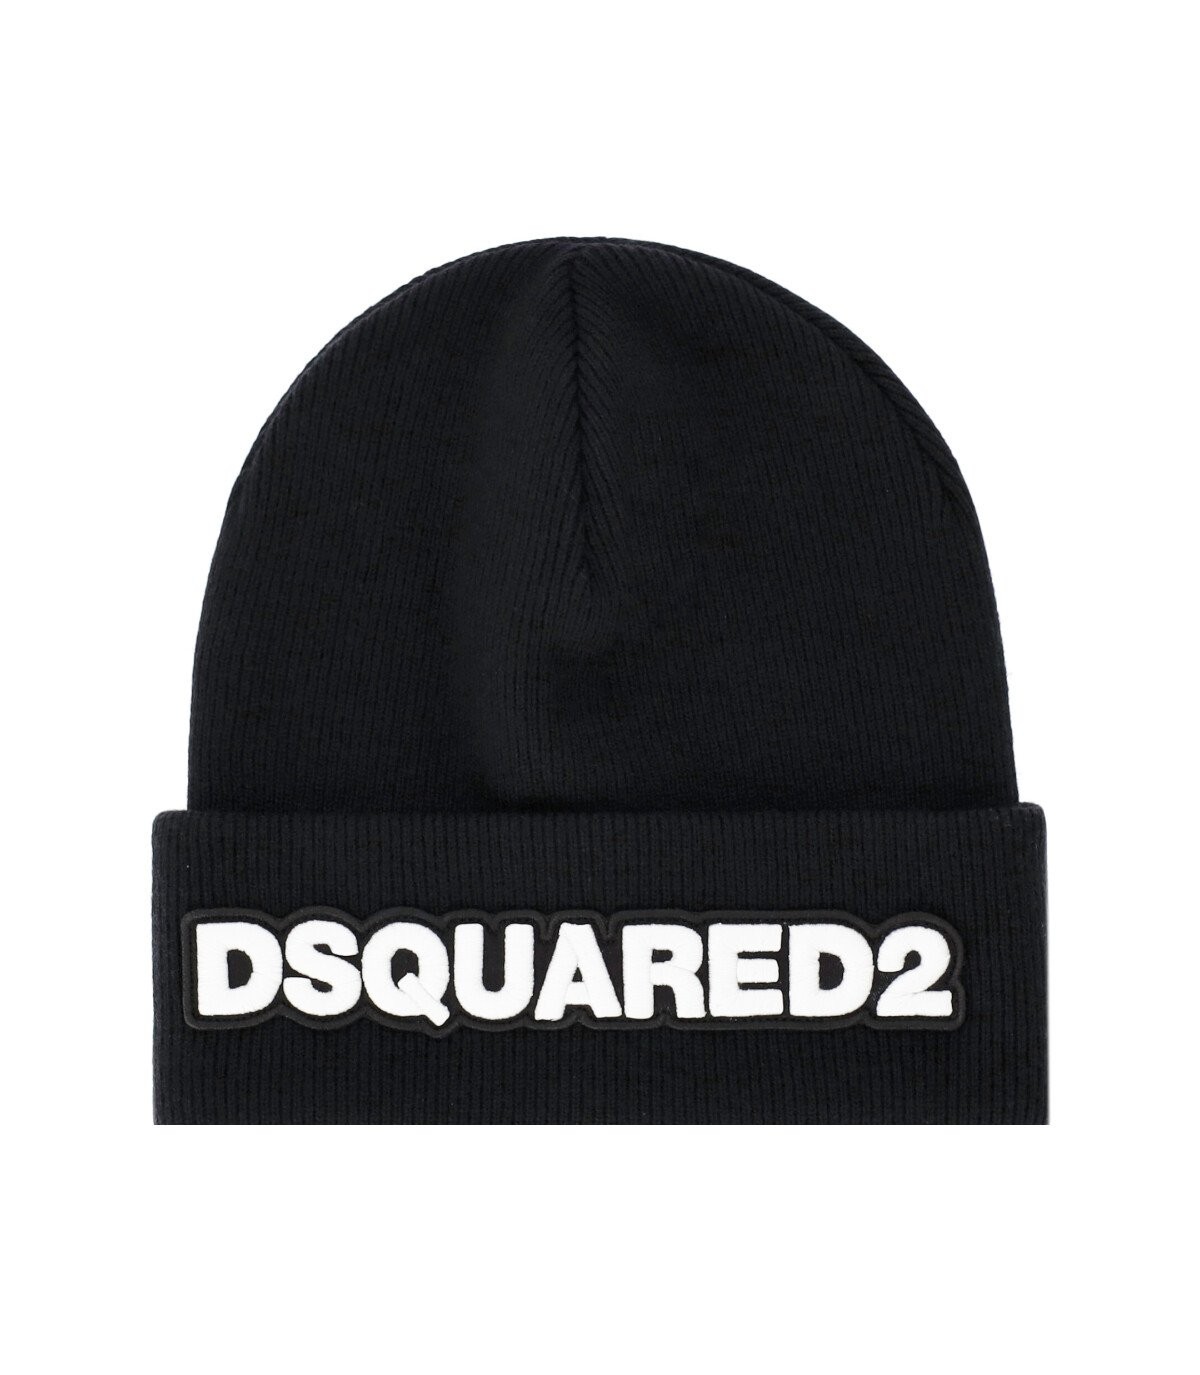 DSQUARED2 BLACK BEANIE WITH WHITE LOGO